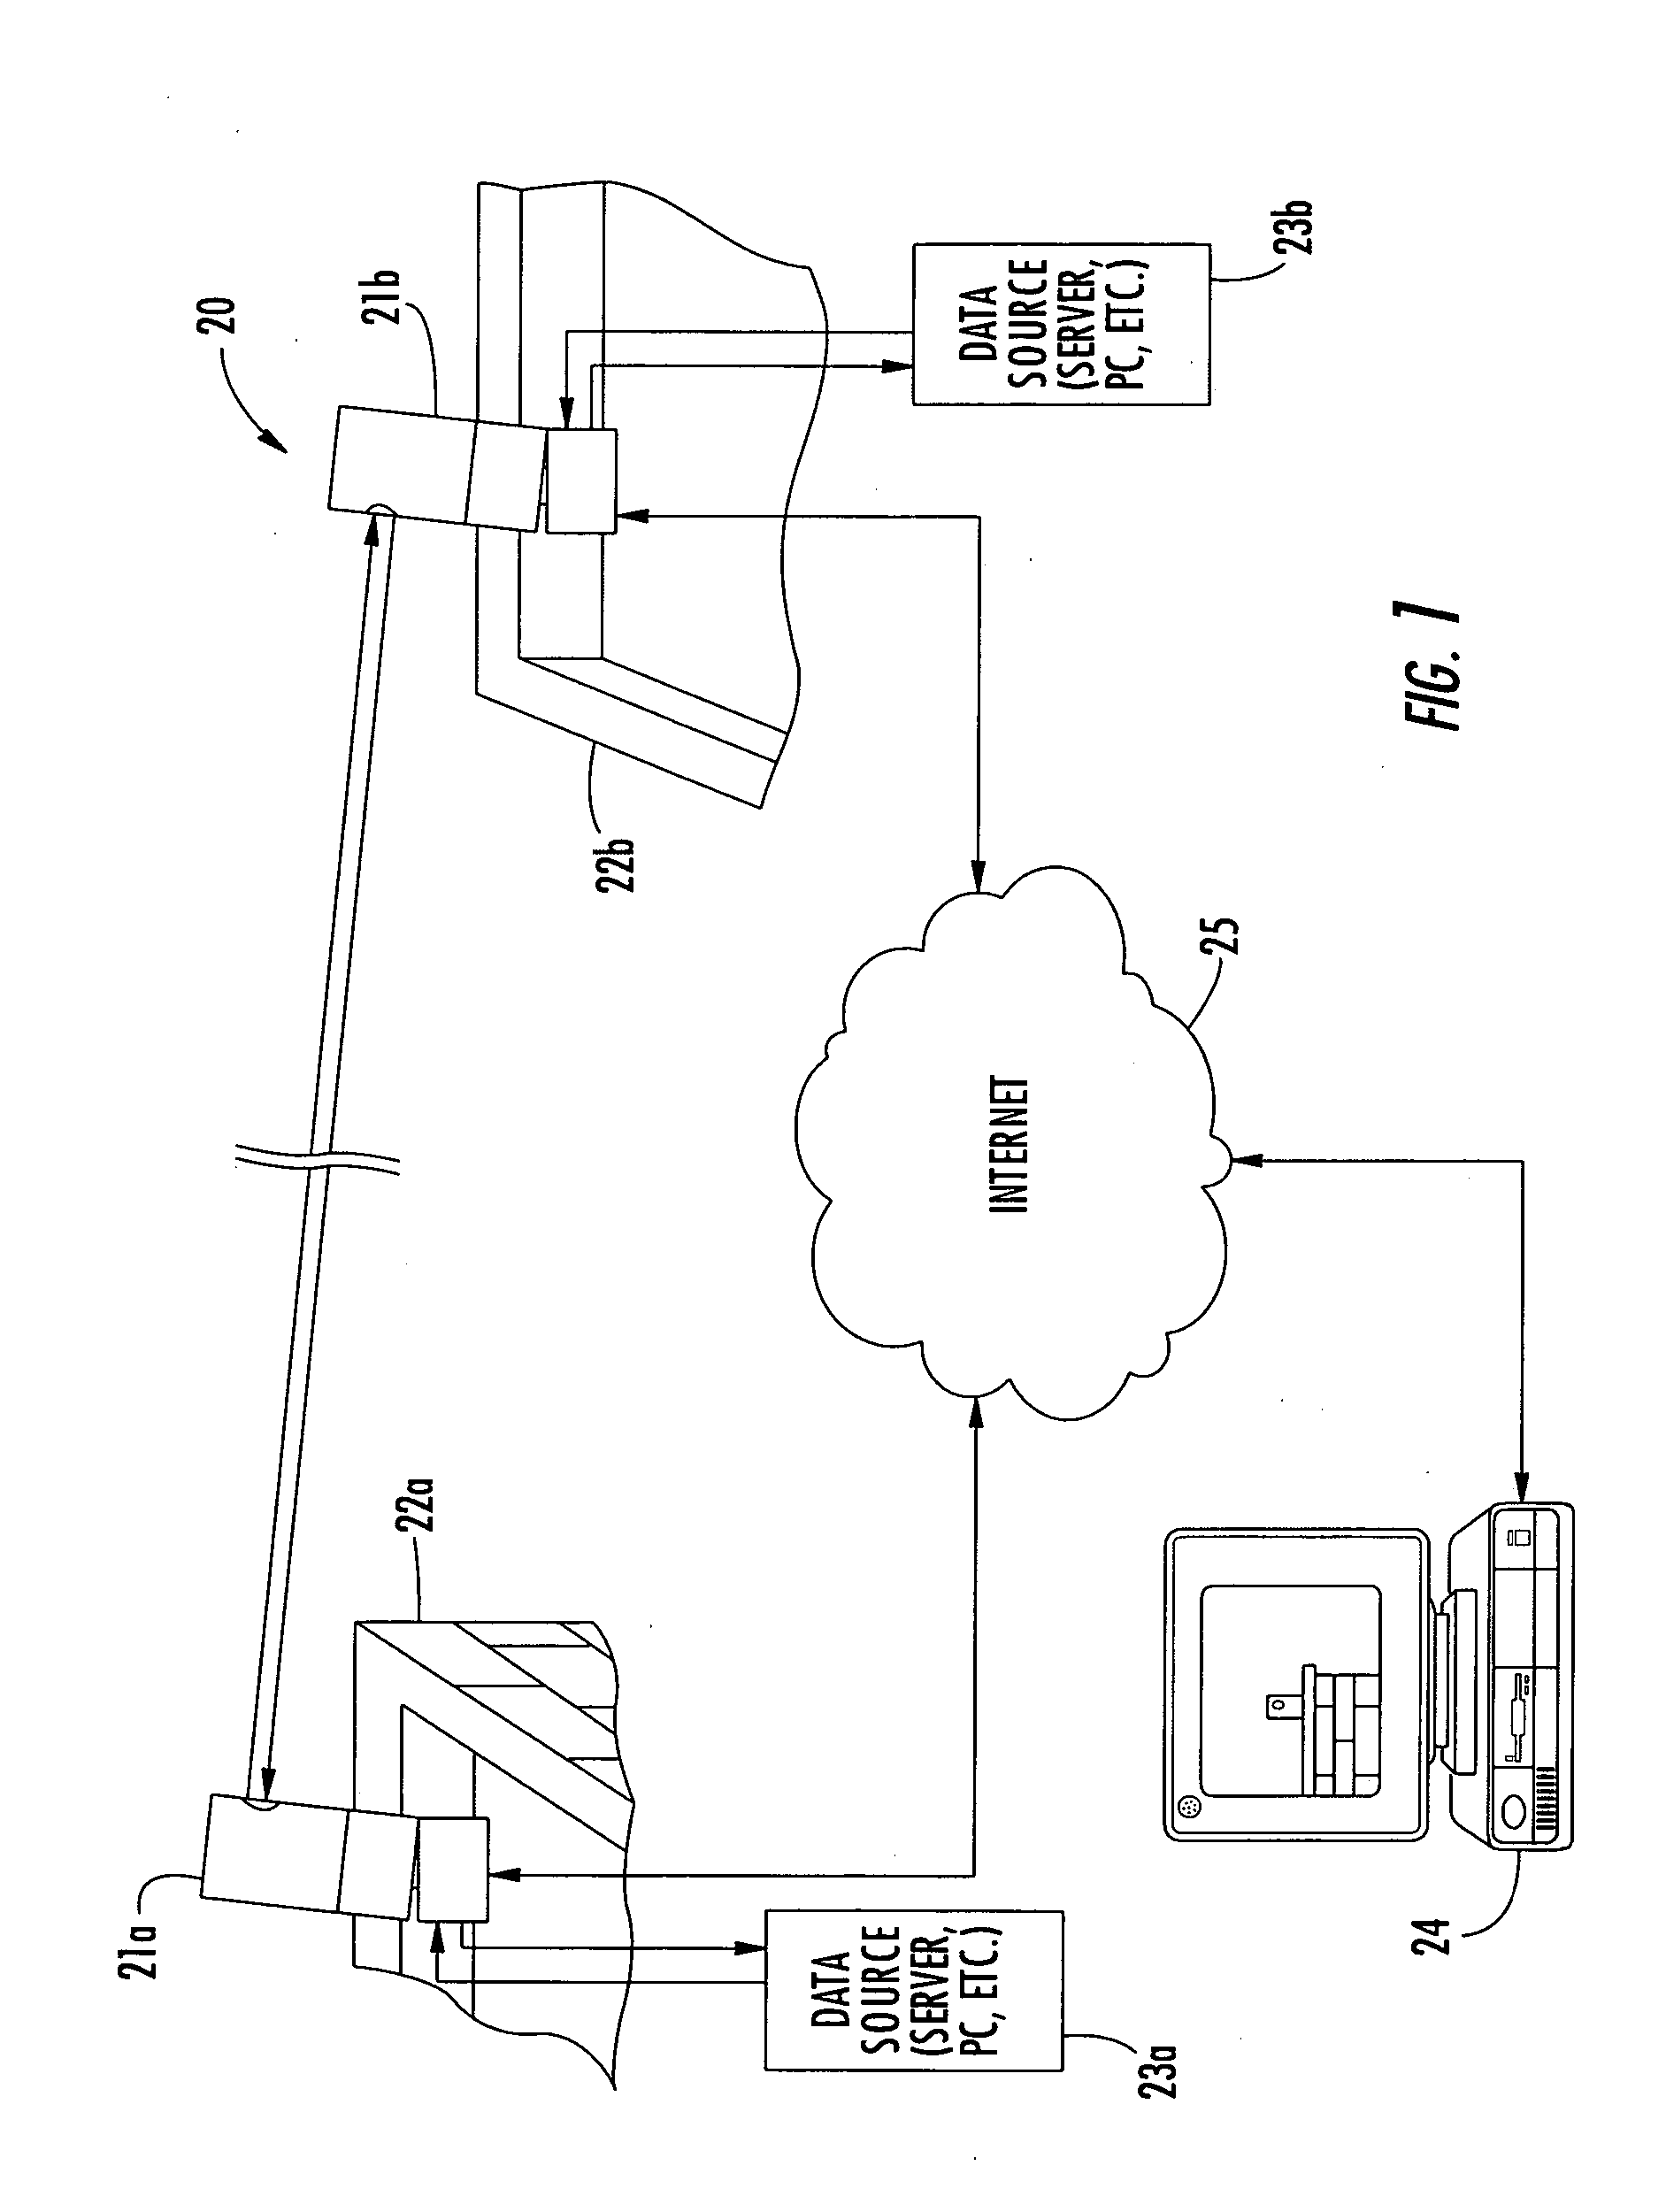 Modular free space optical (FSO) device and related methods